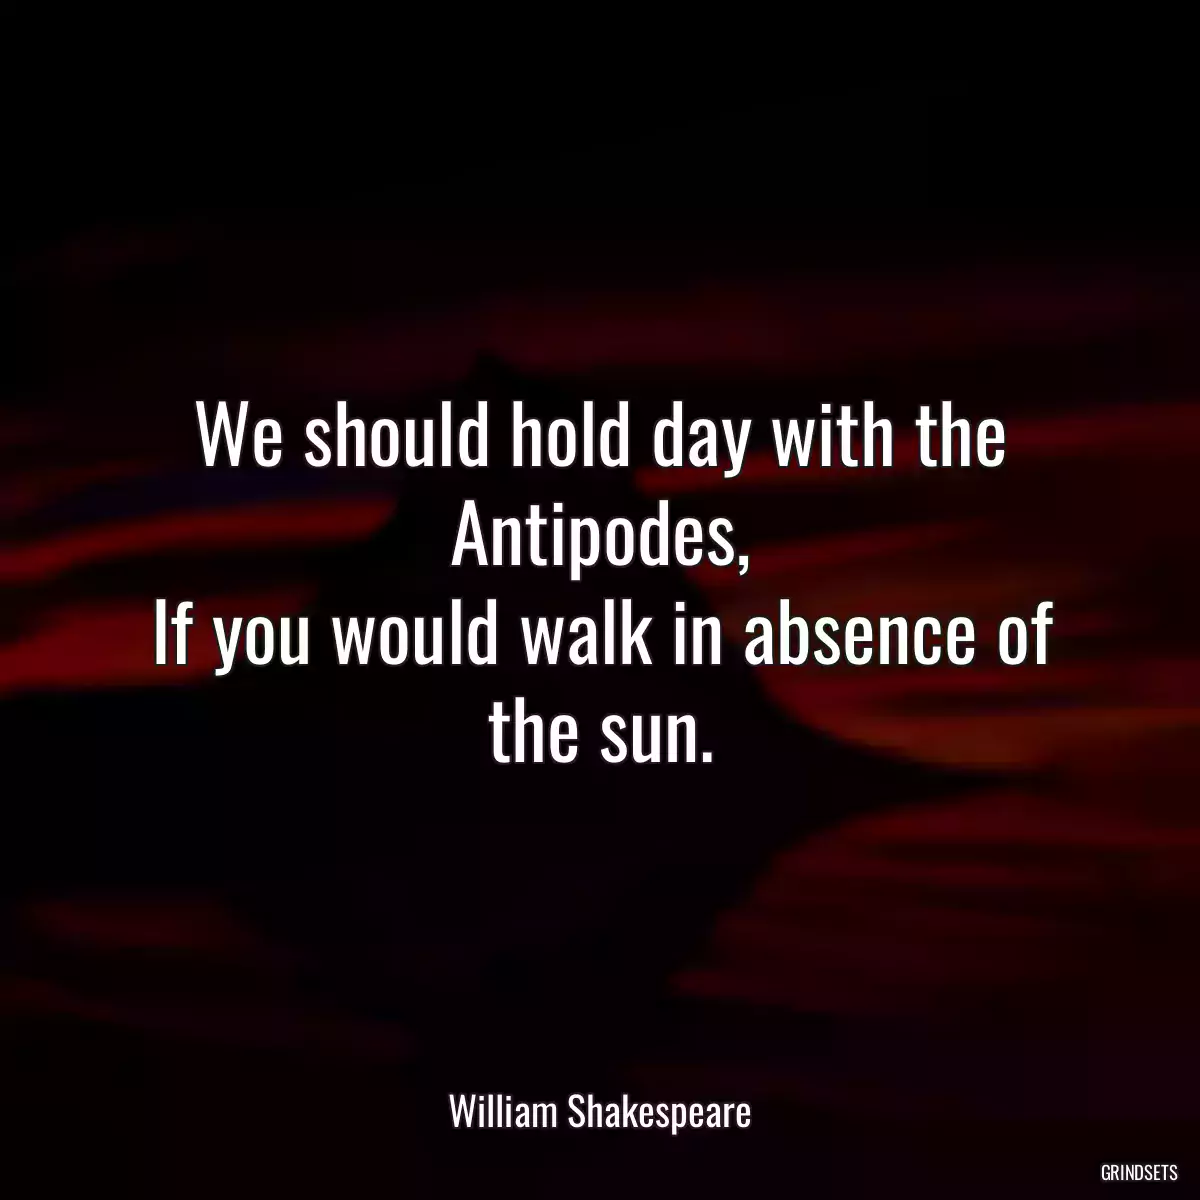 We should hold day with the Antipodes,
If you would walk in absence of the sun.